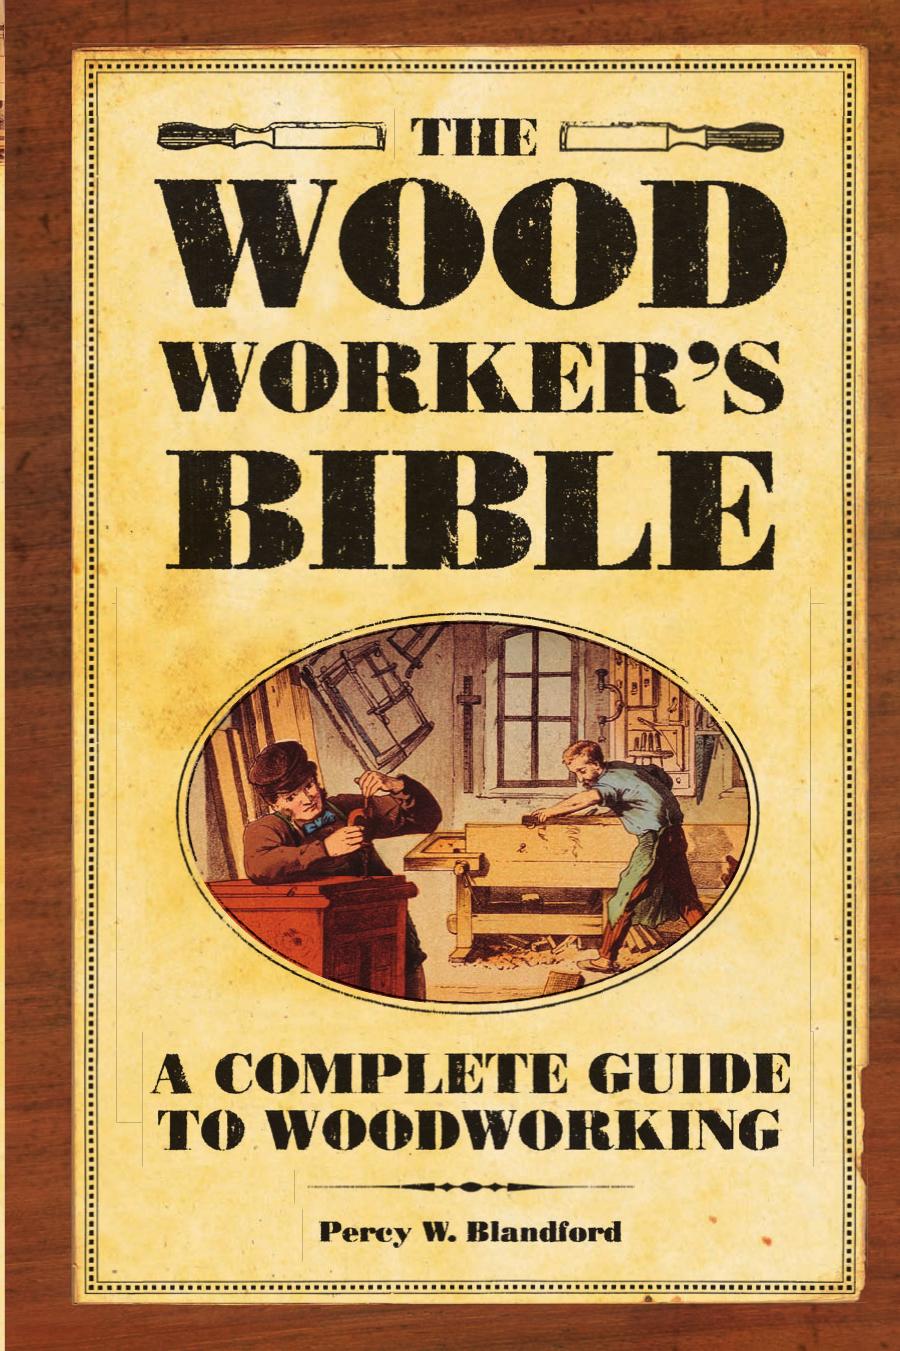 The Woodworker’s Bible A Complete Guide to Woodworking (Popular Woodworking  2007